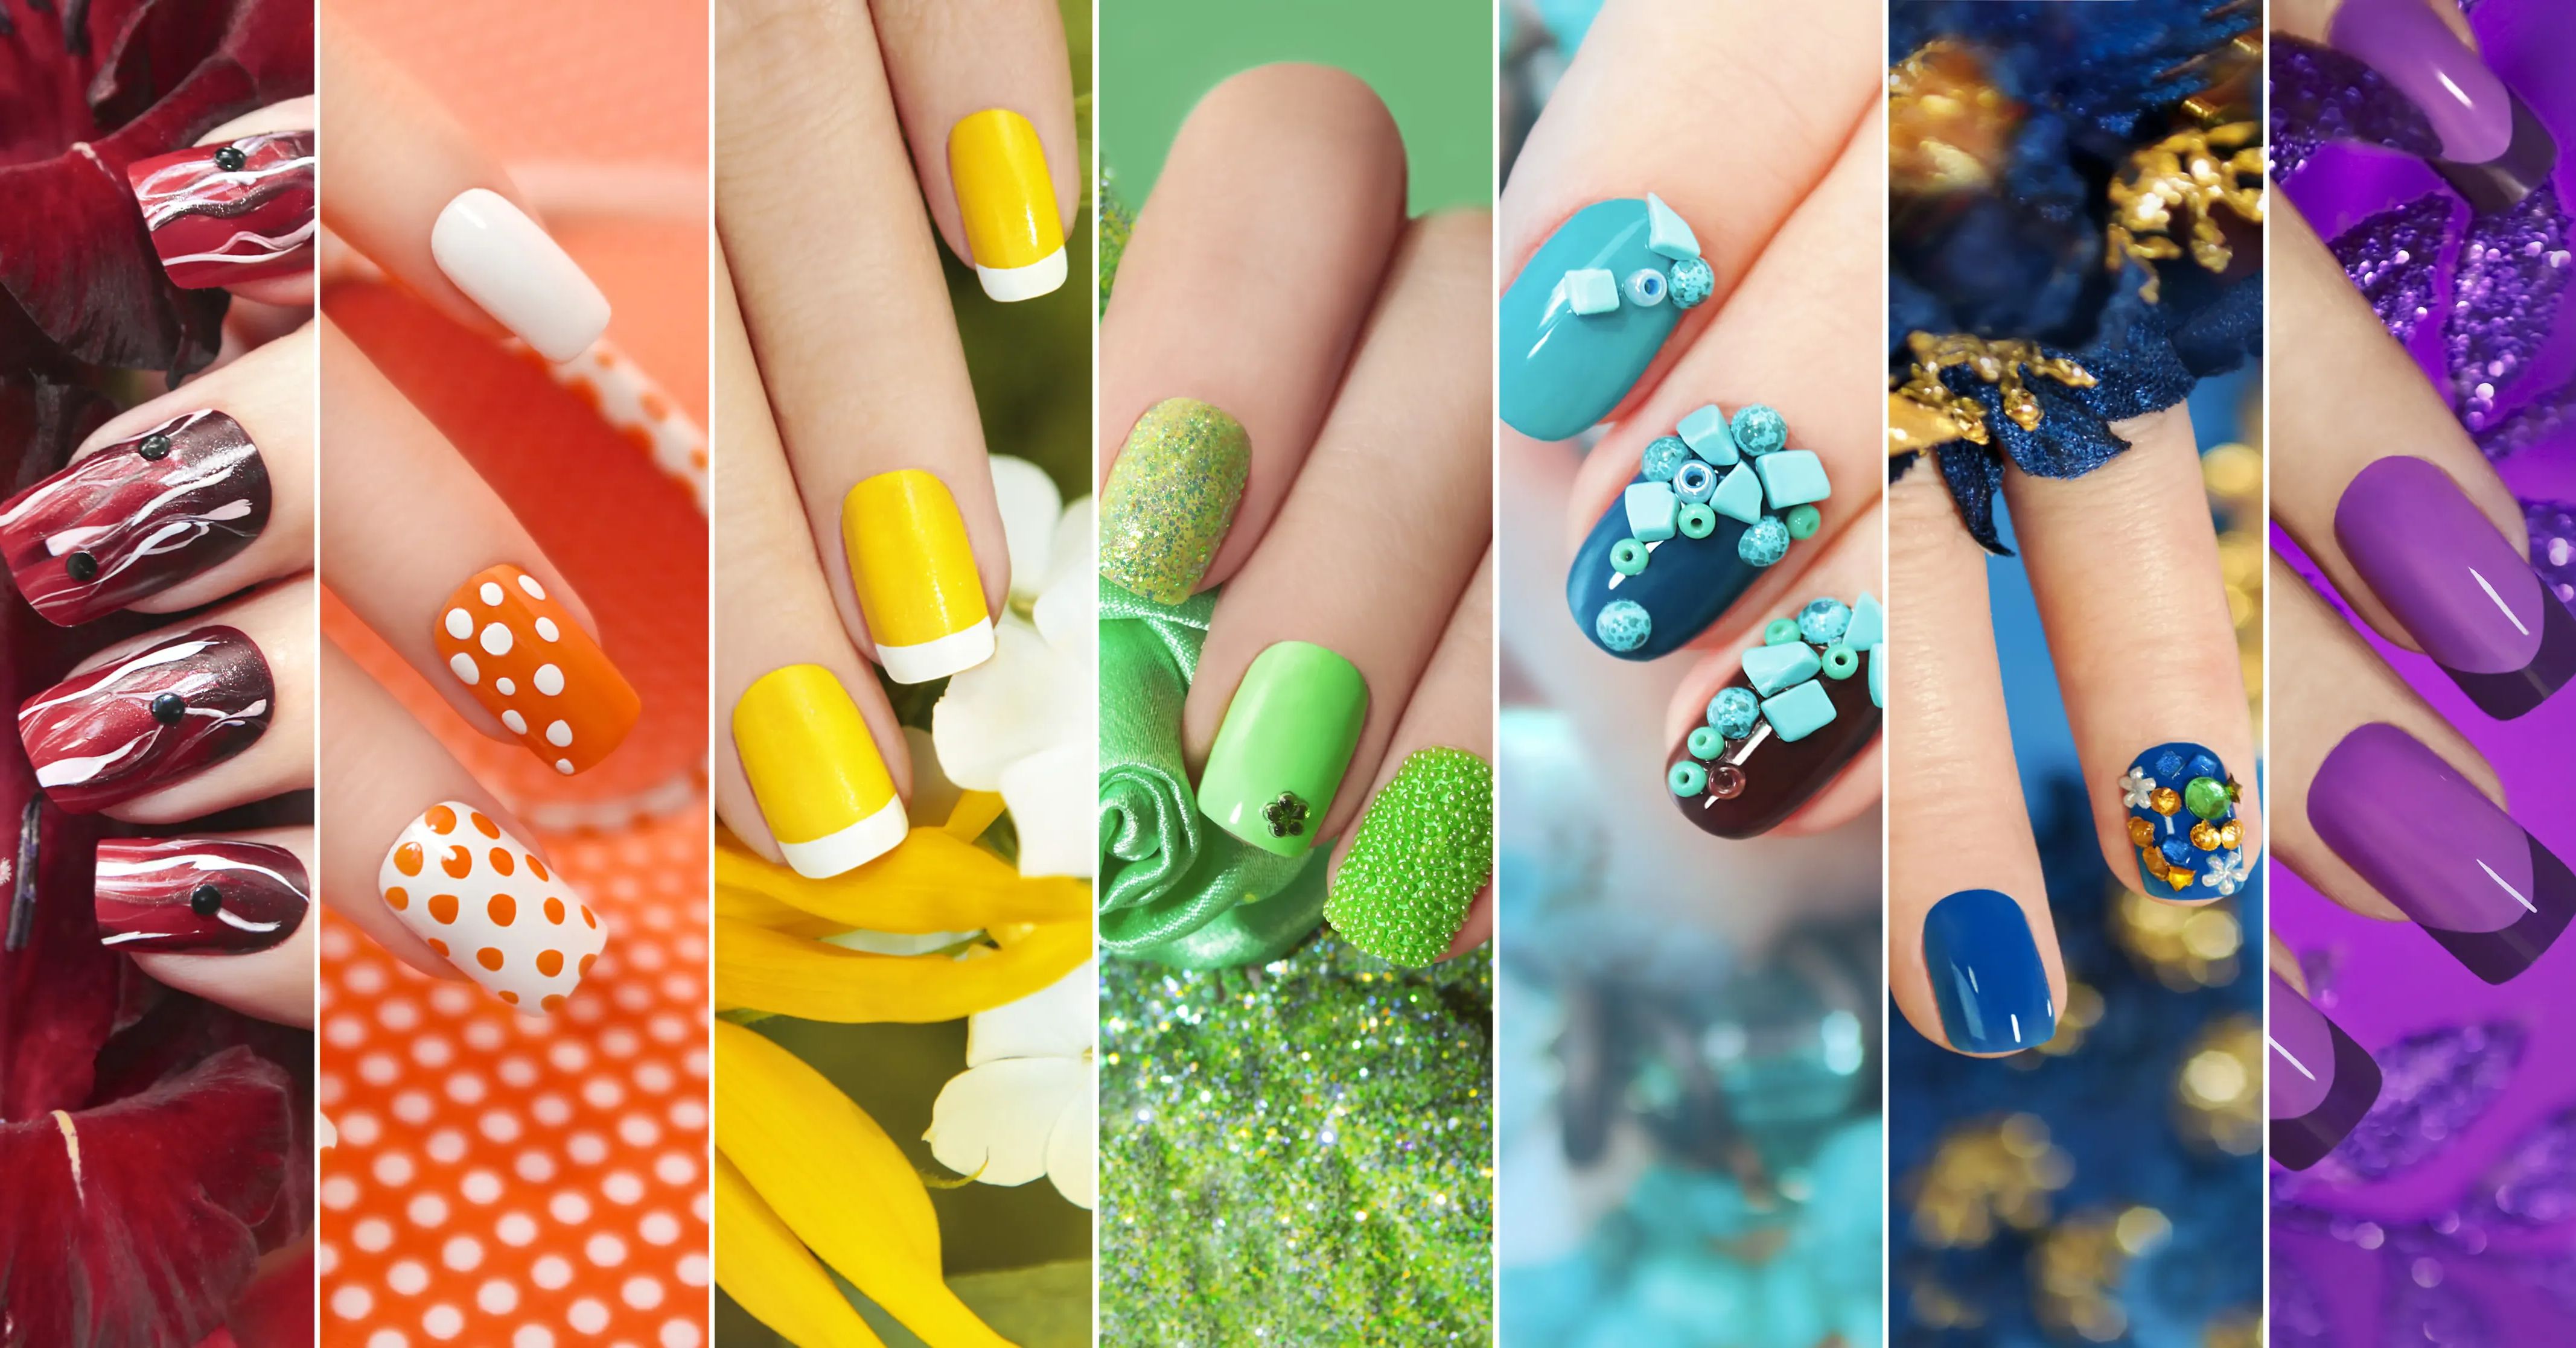 What's the most popular nail style?